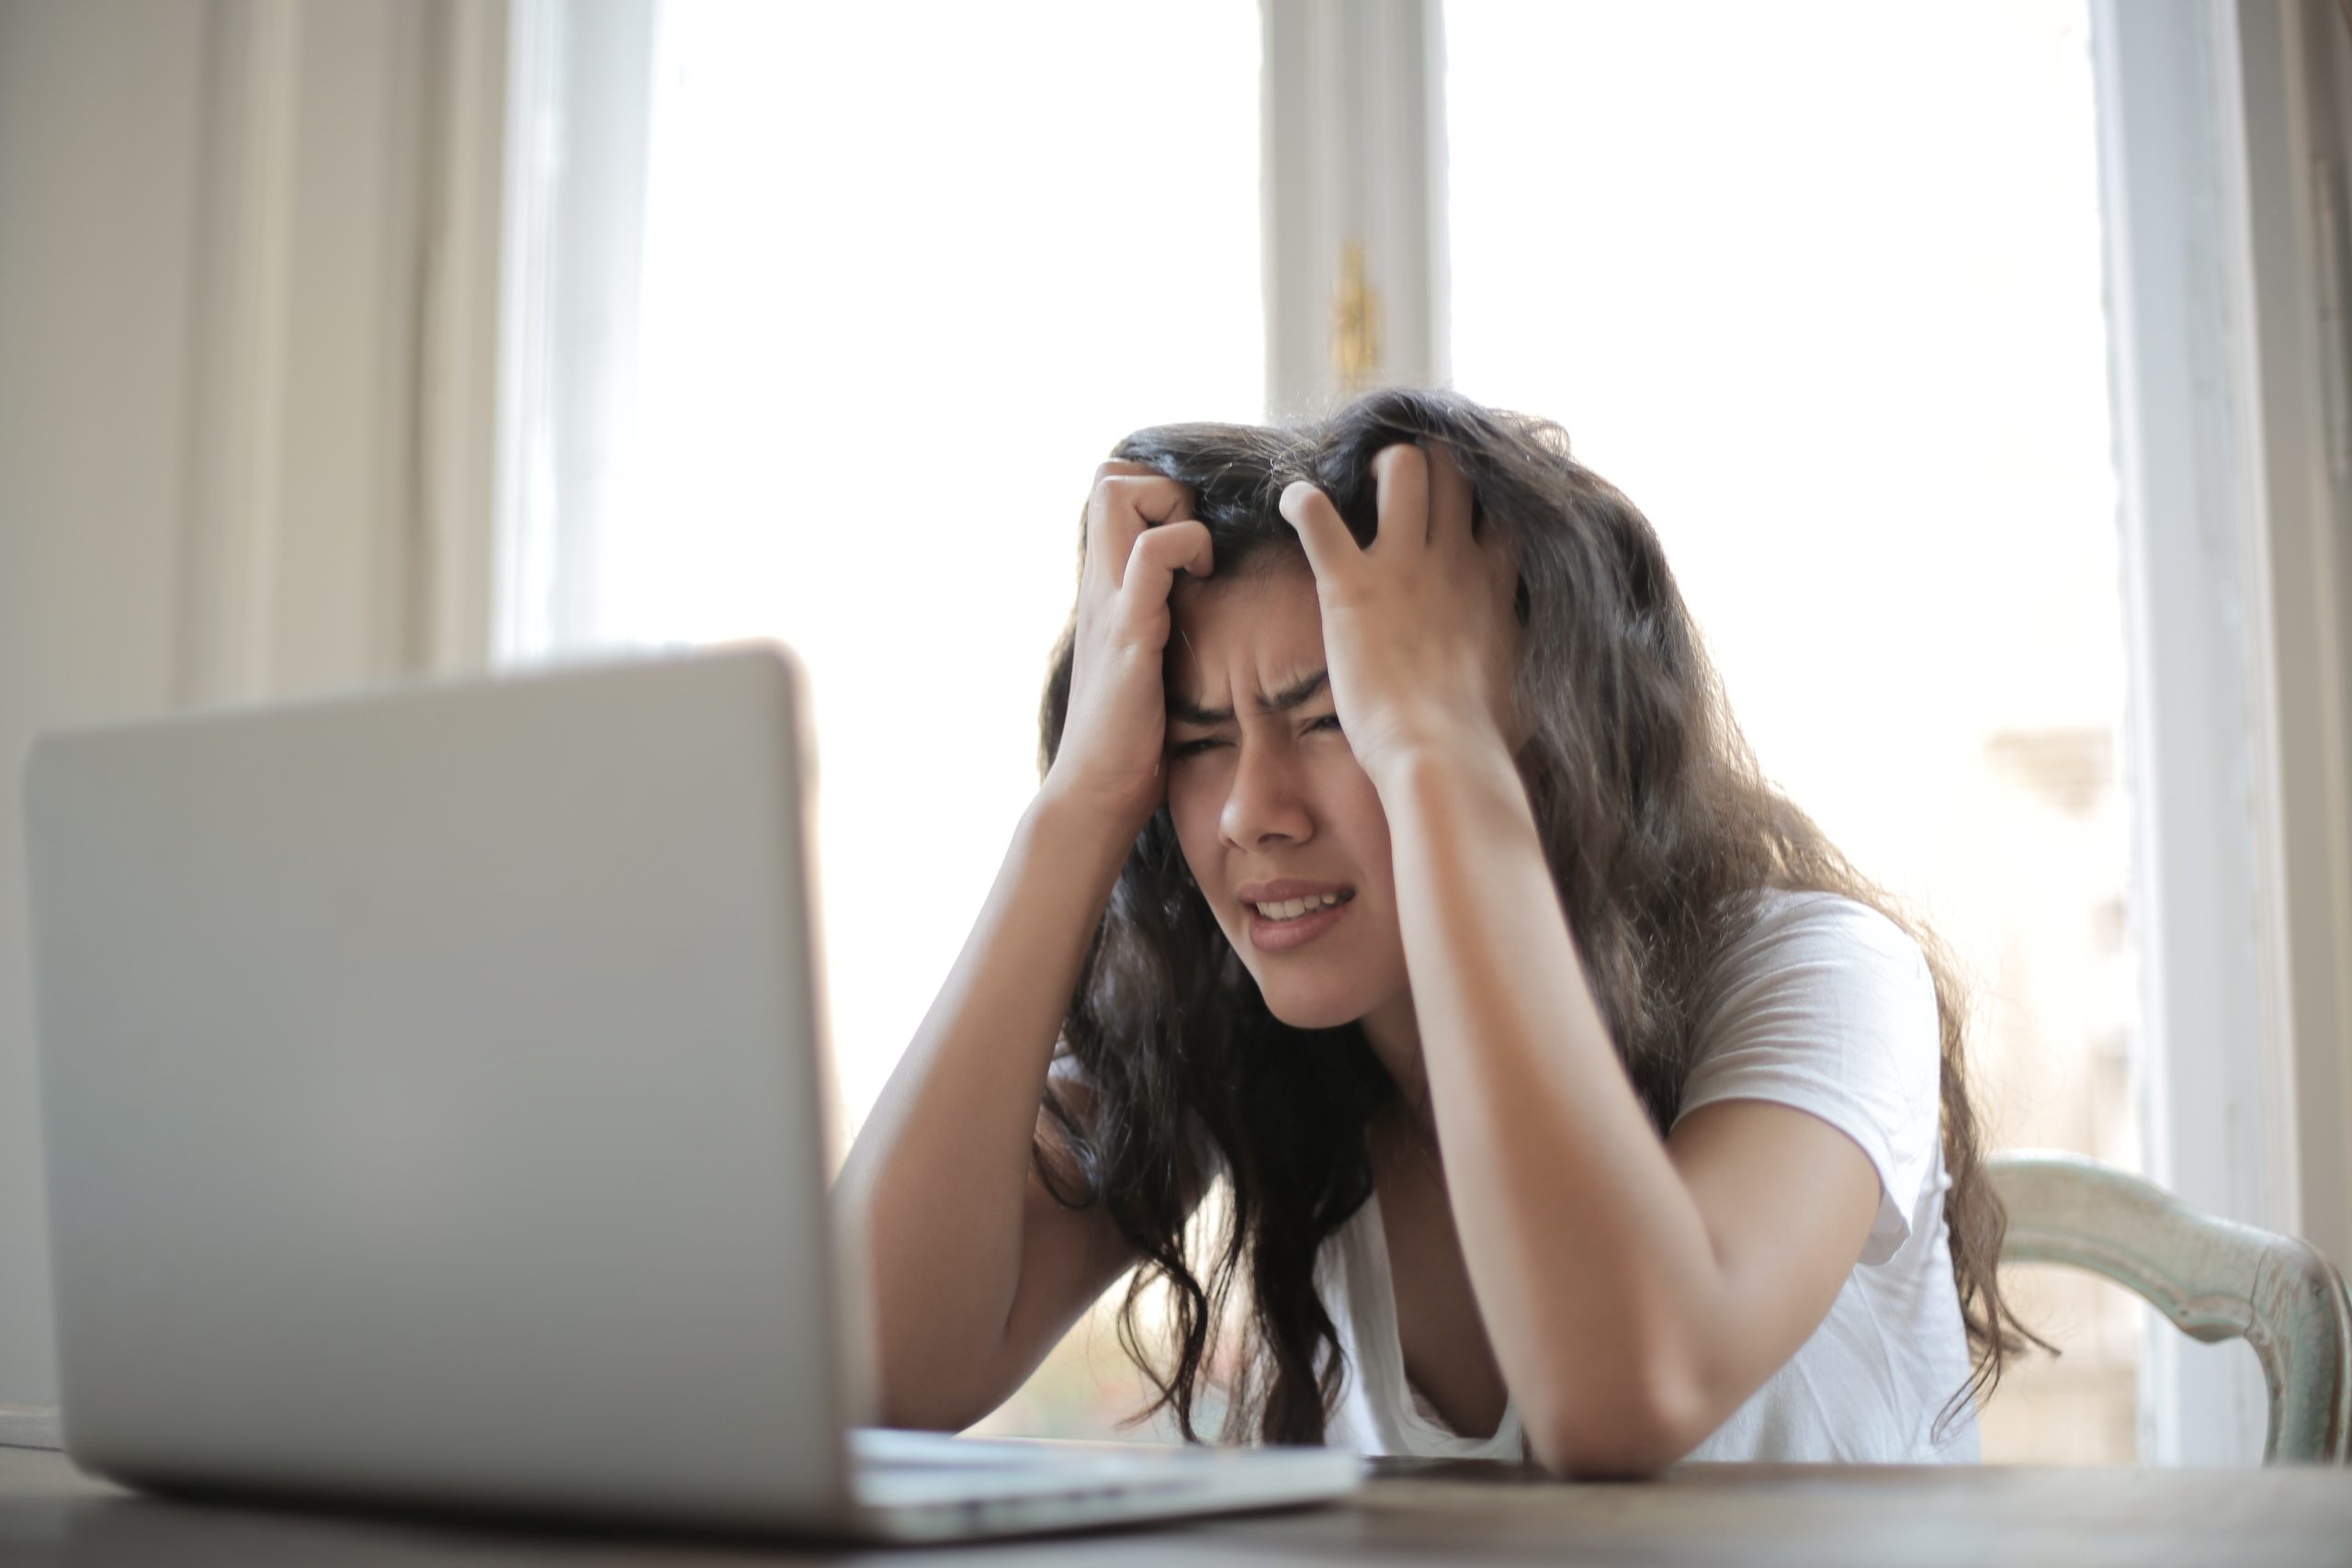 Frustrated woman in front of her computer.